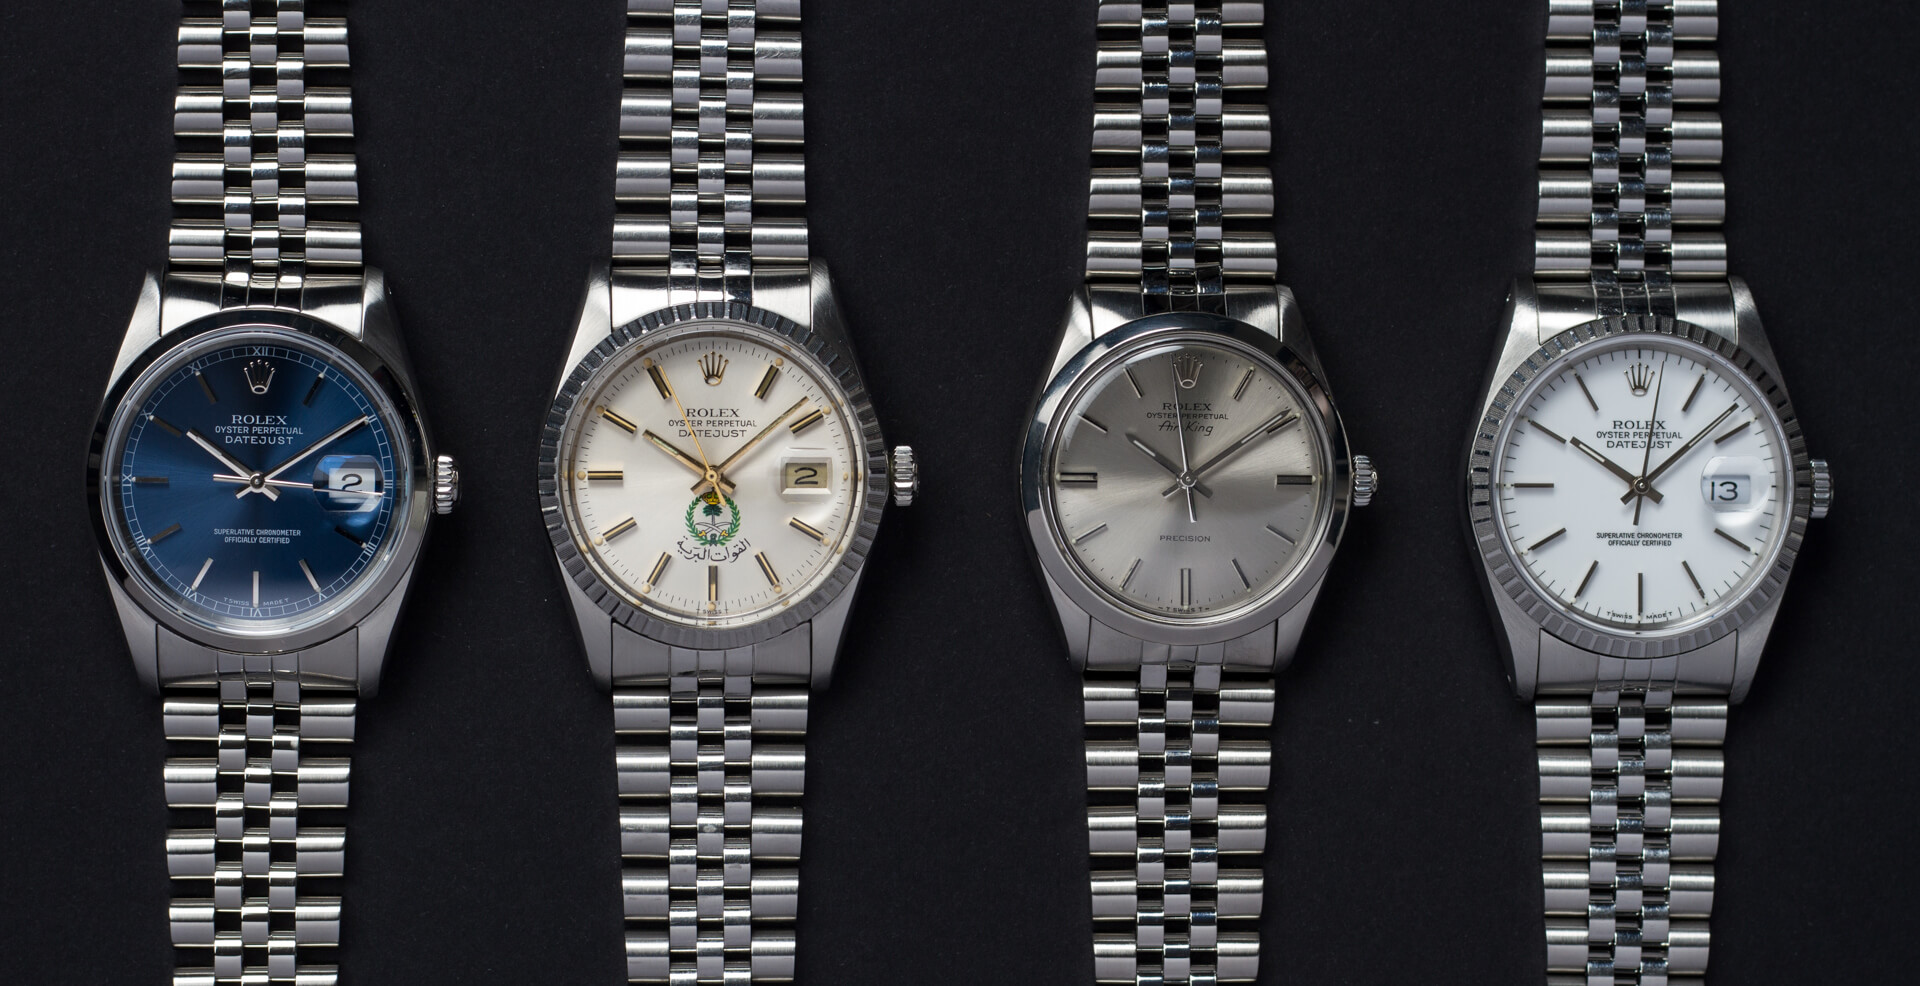 Acrylic vs Sapphire; The pros, cons, and how it affects the look of your watch